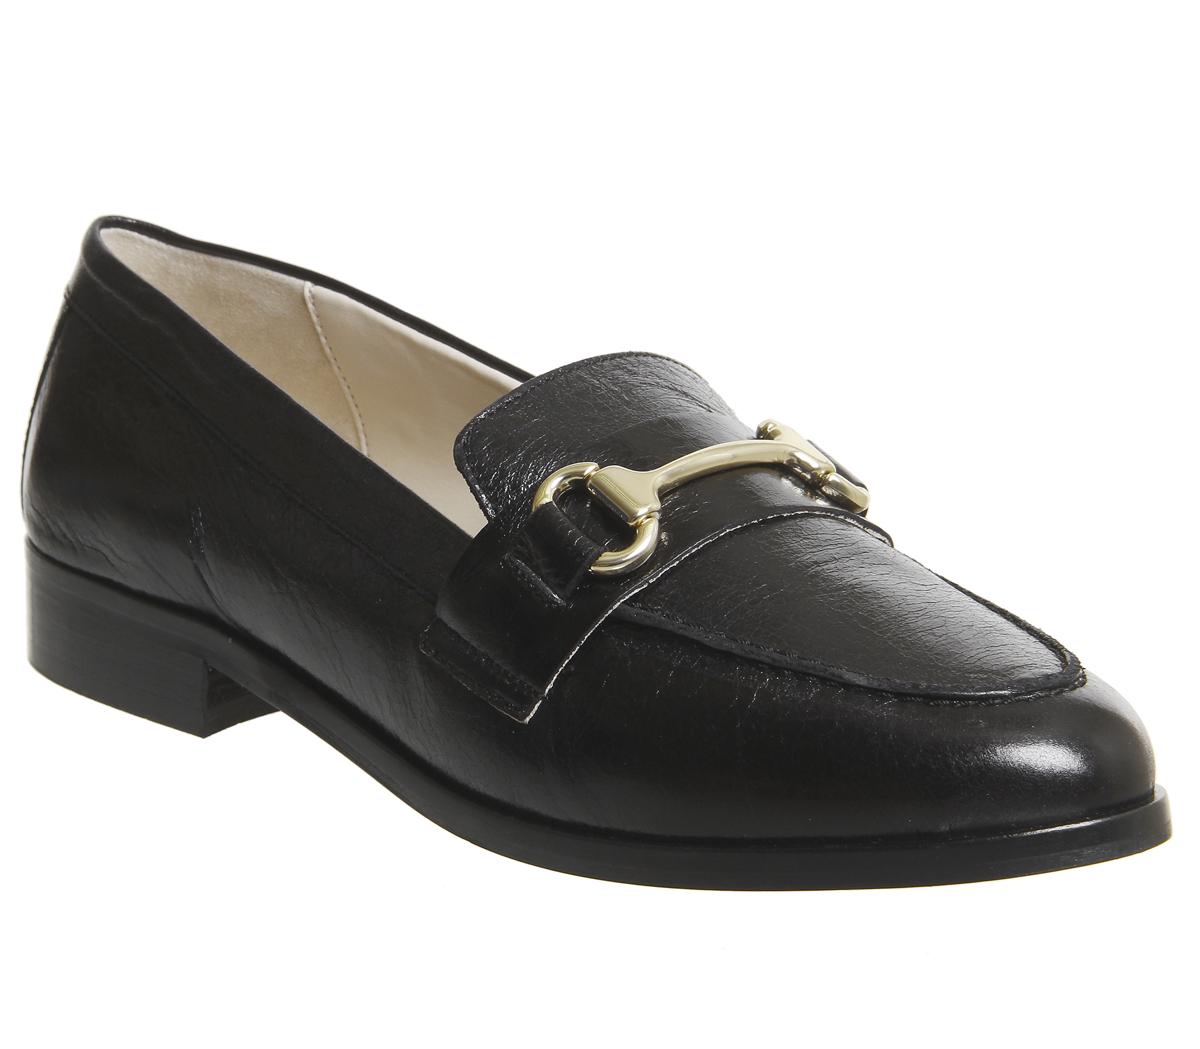 OFFICE Fluster Loafers Black Groucho Leather - Women’s Loafers